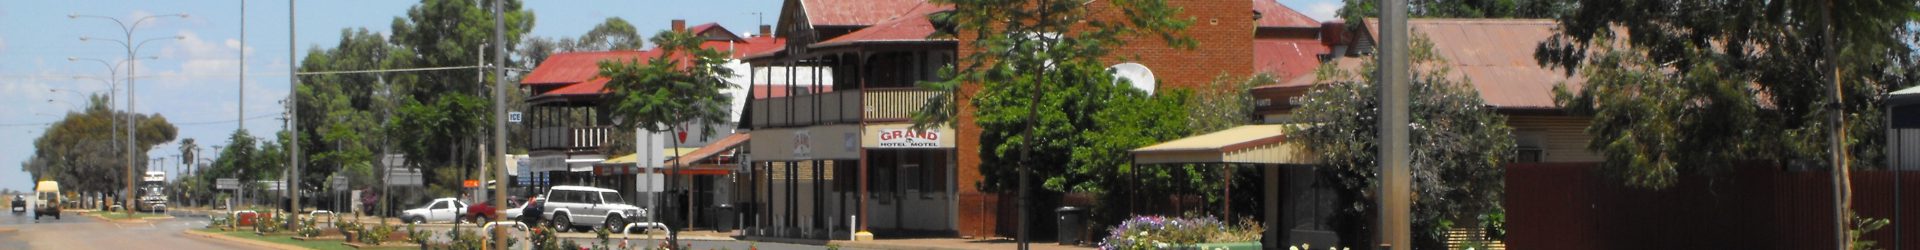 Shire of Mount Magnet